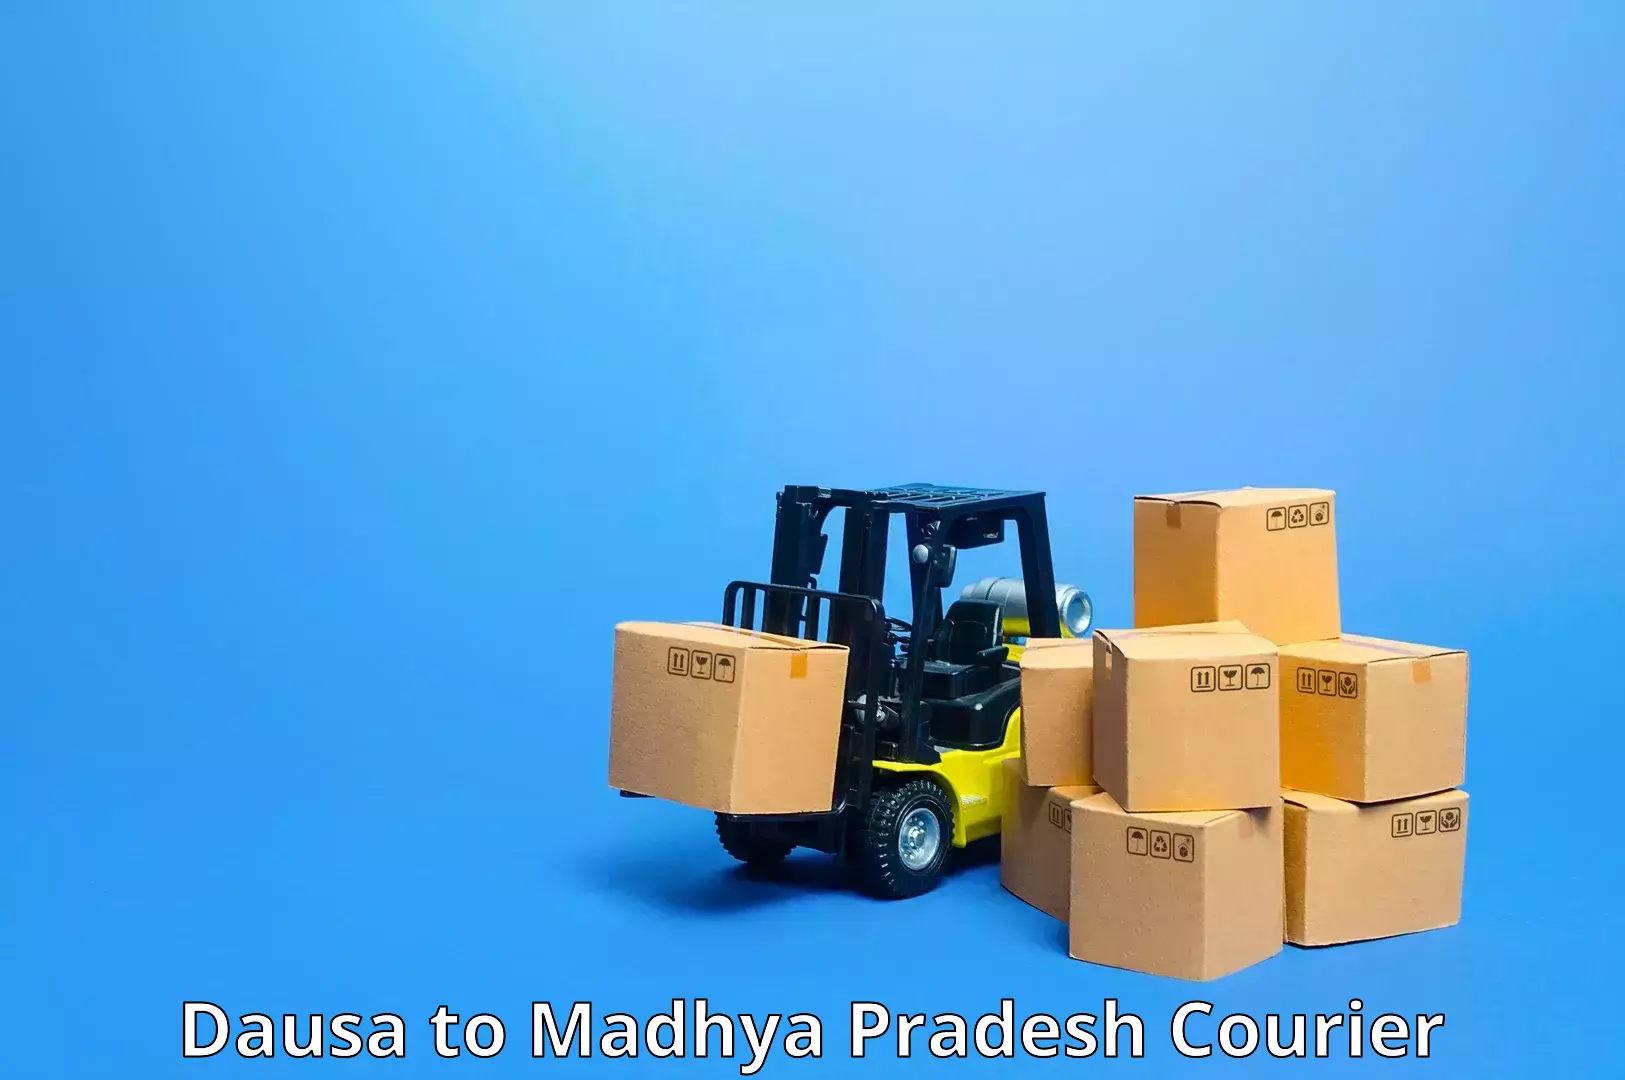 Parcel delivery automation Dausa to Burhanpur